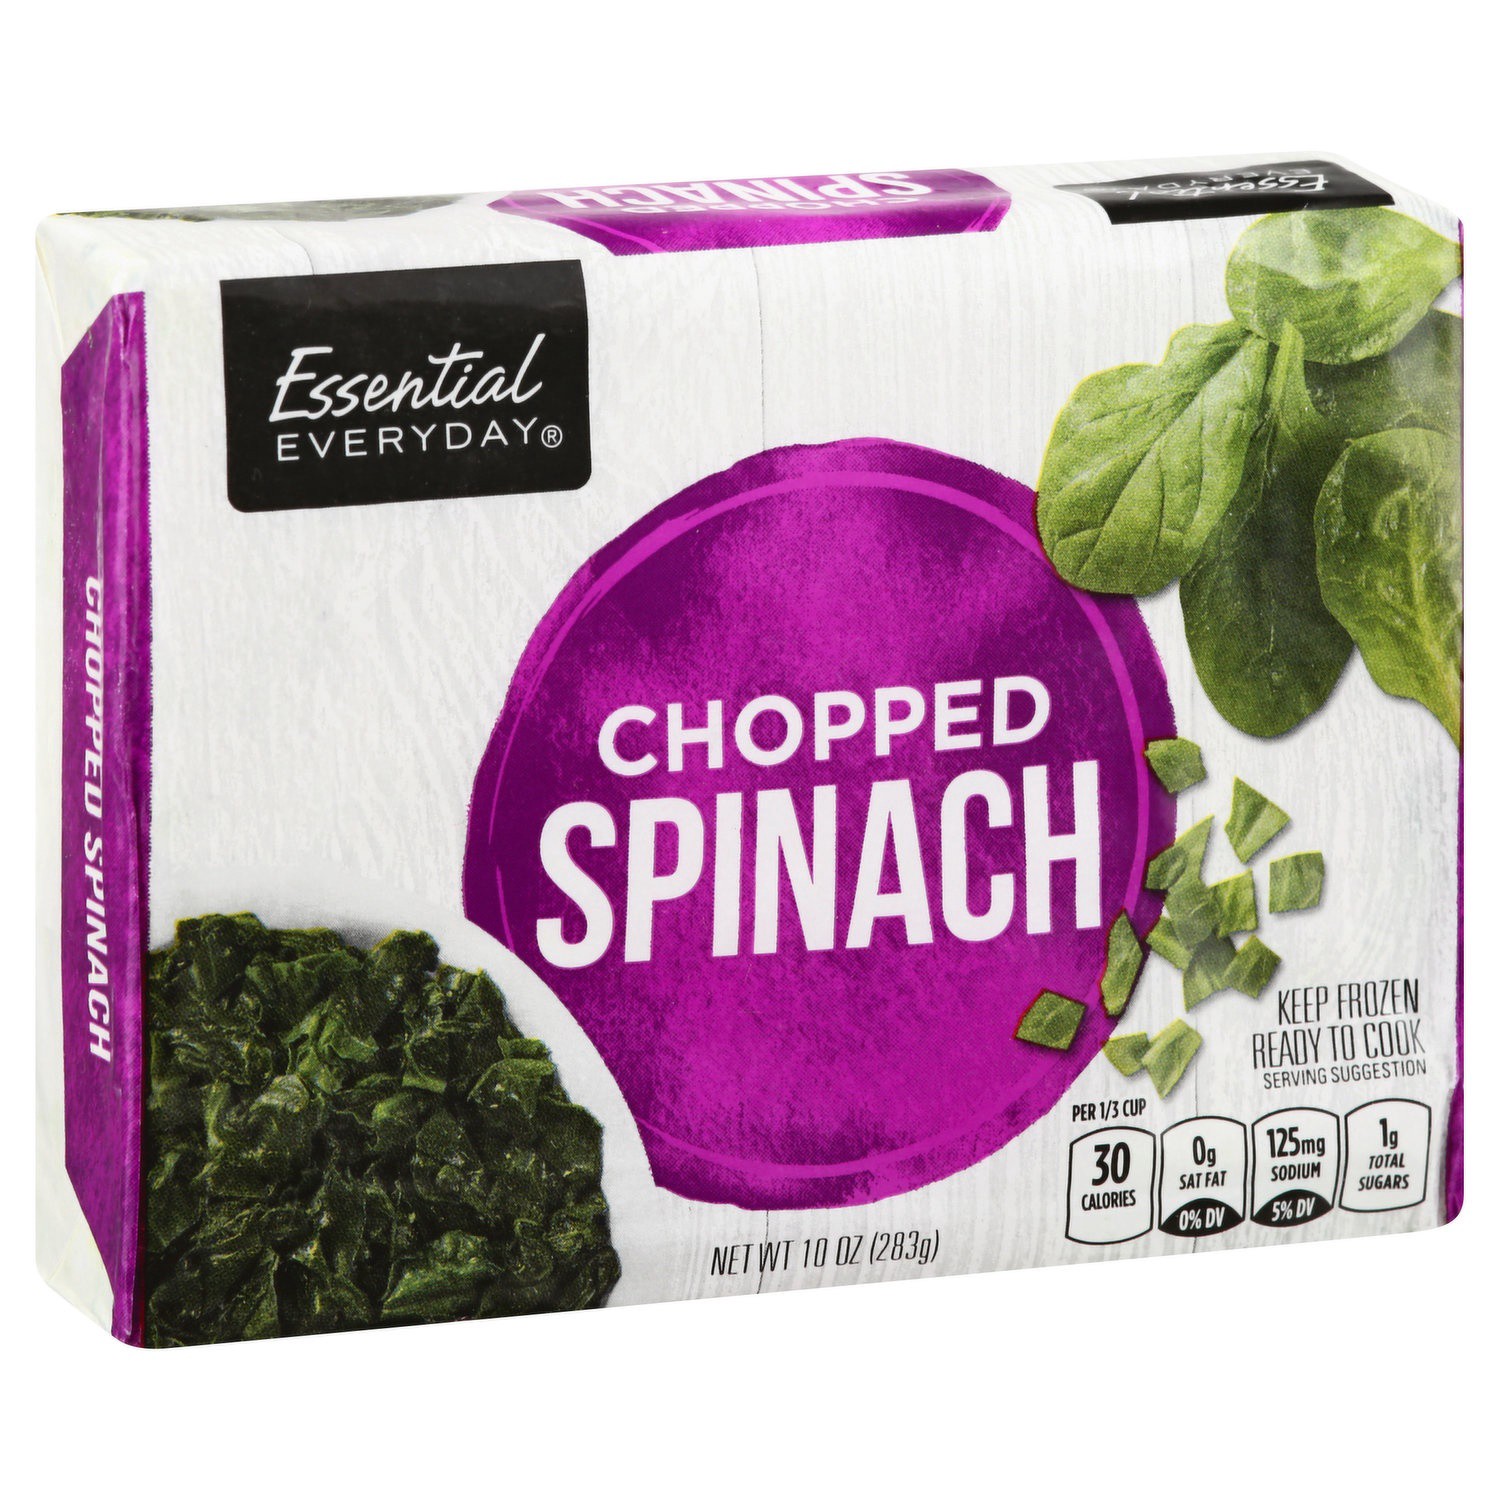 slide 1 of 1, Ee Spinach Chopped Box, 10 oz